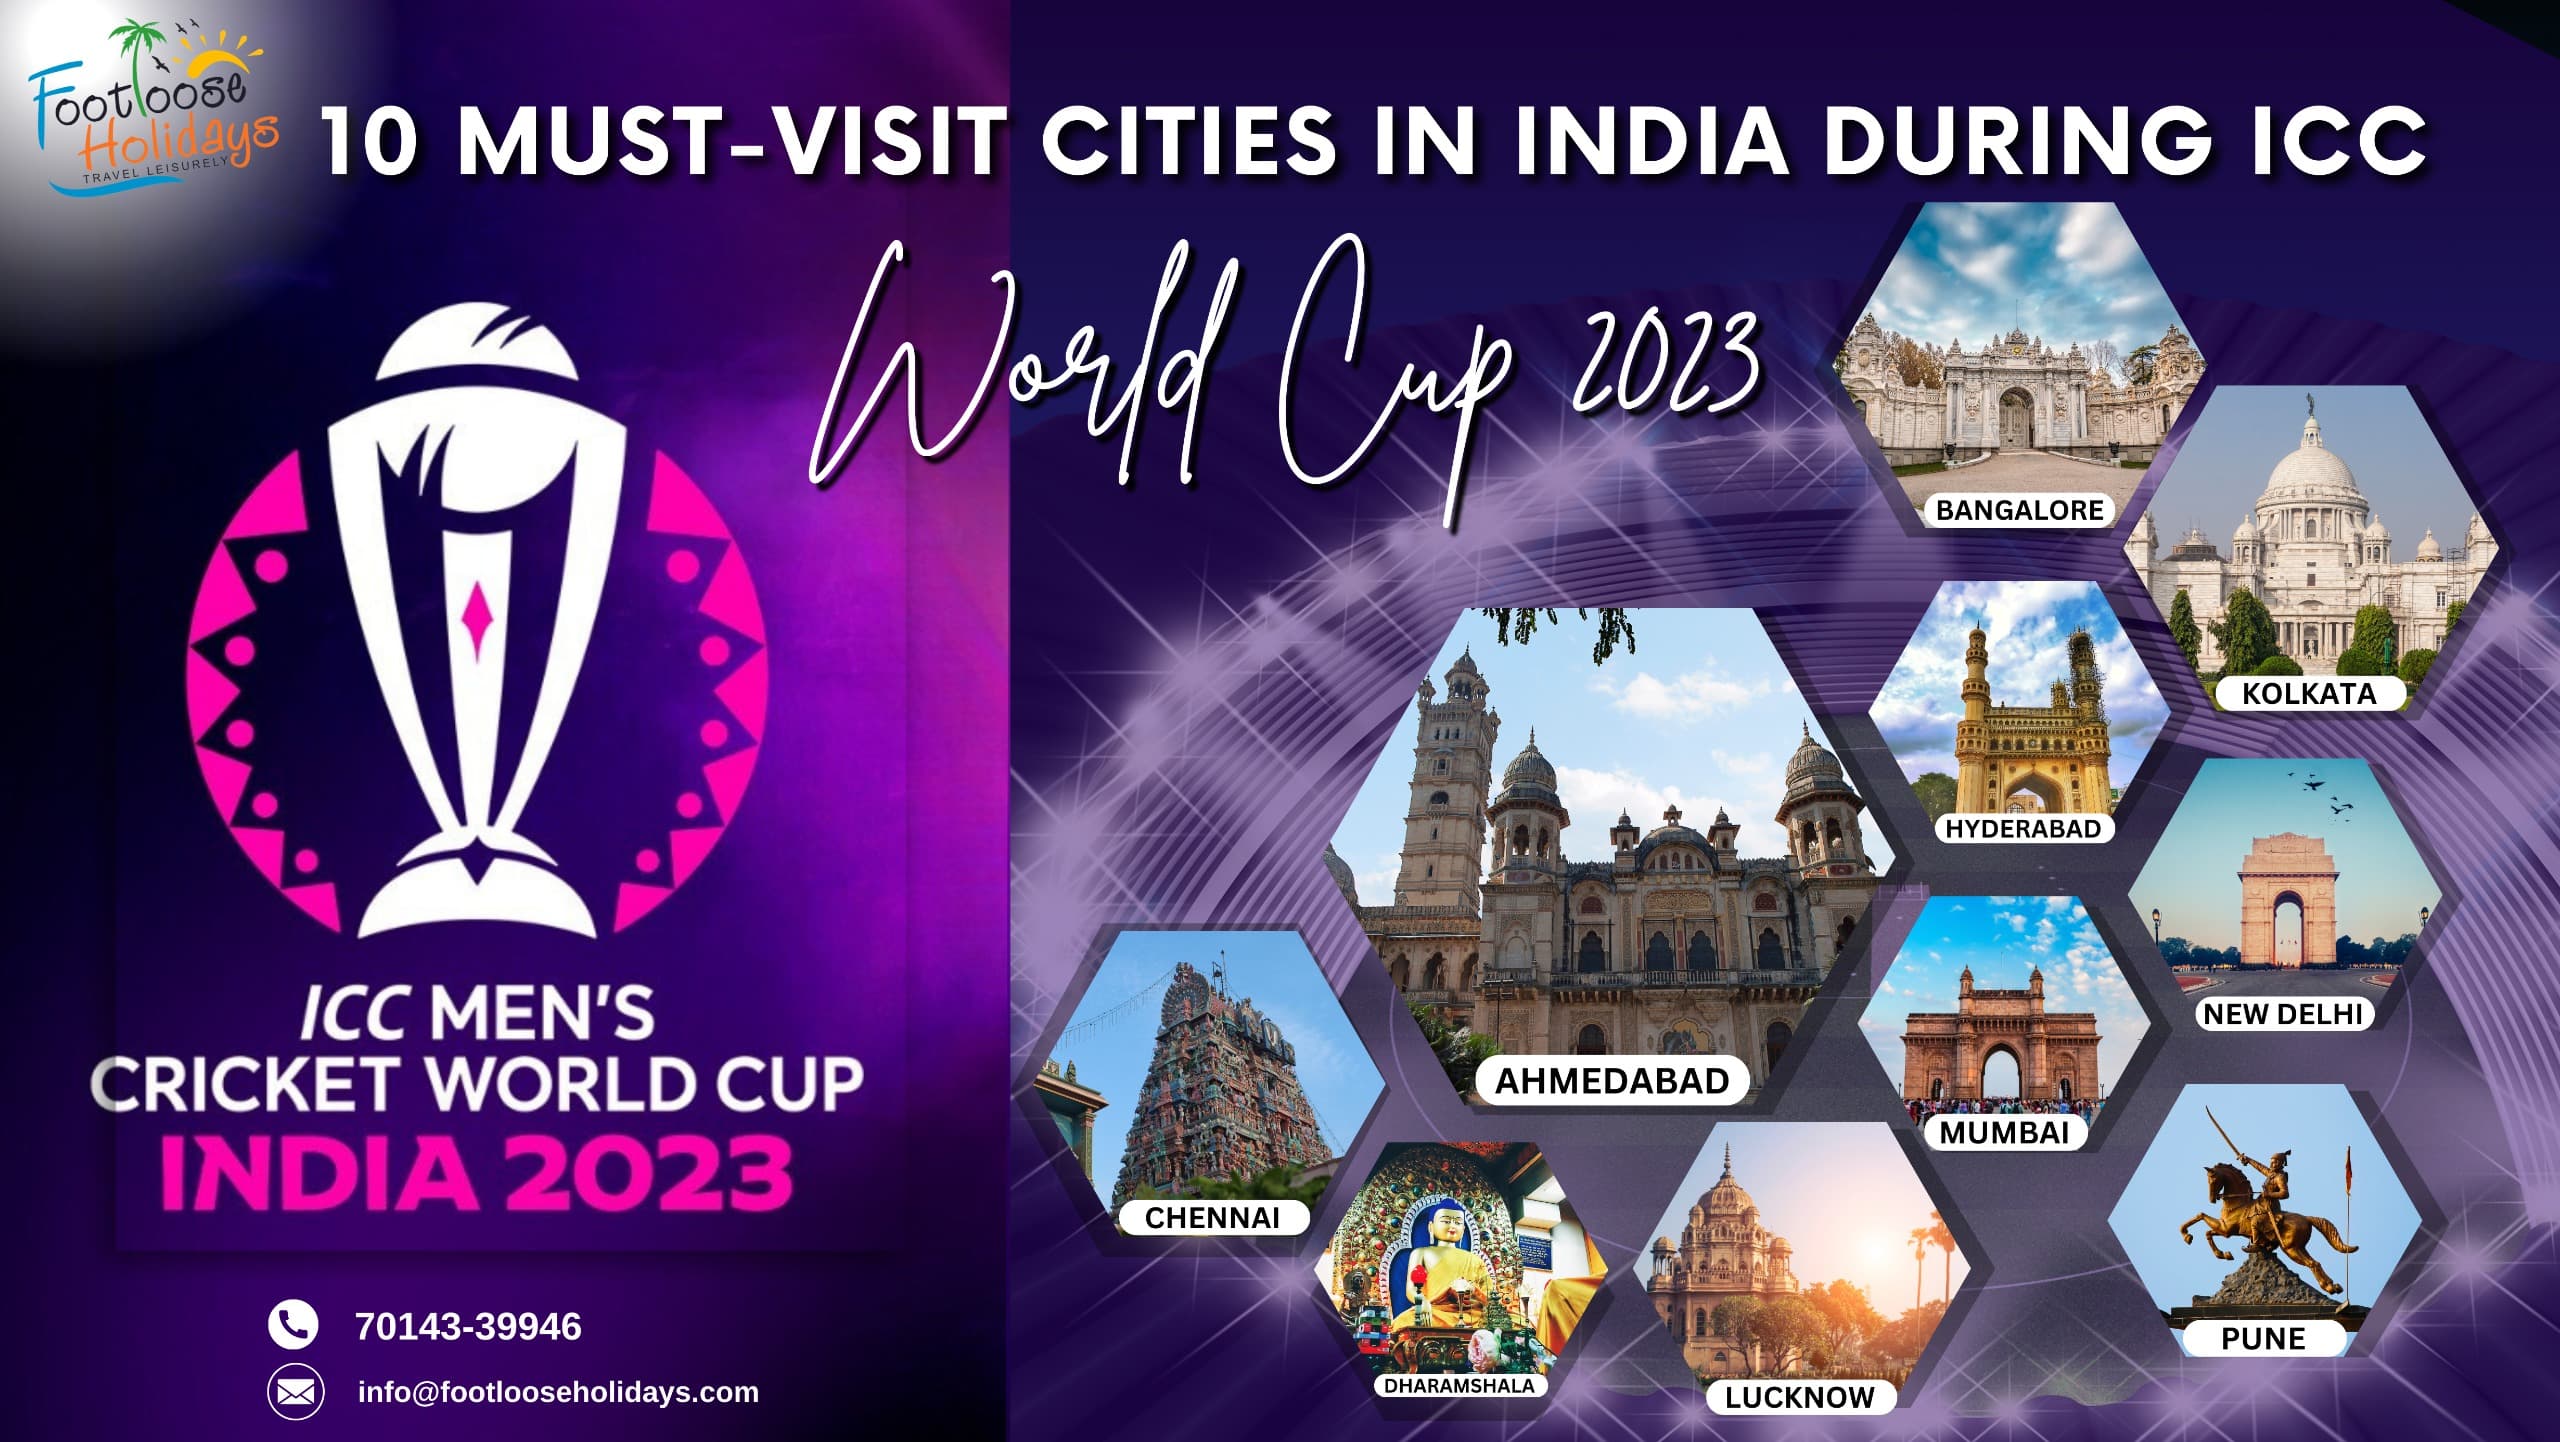 10 Must-Visit Cities in India during ICC World Cup 2023